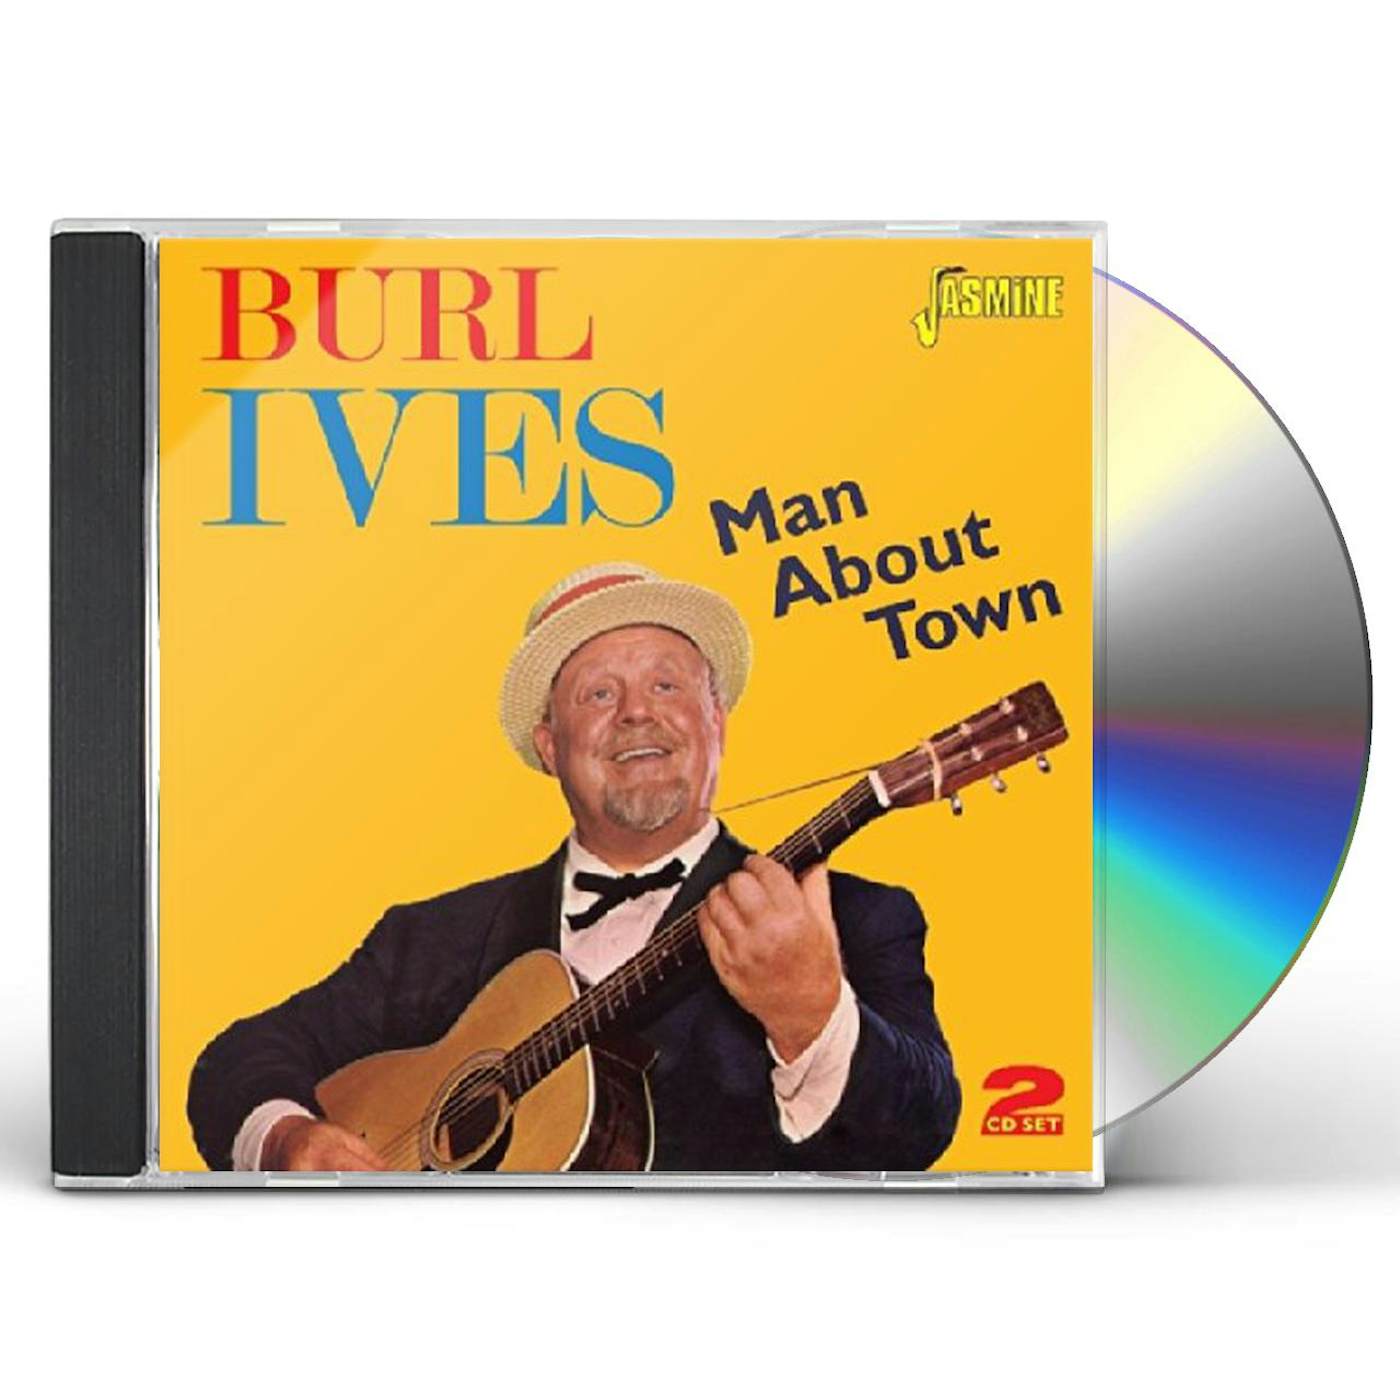 Burl Ives MAN ABOUT TOWN CD